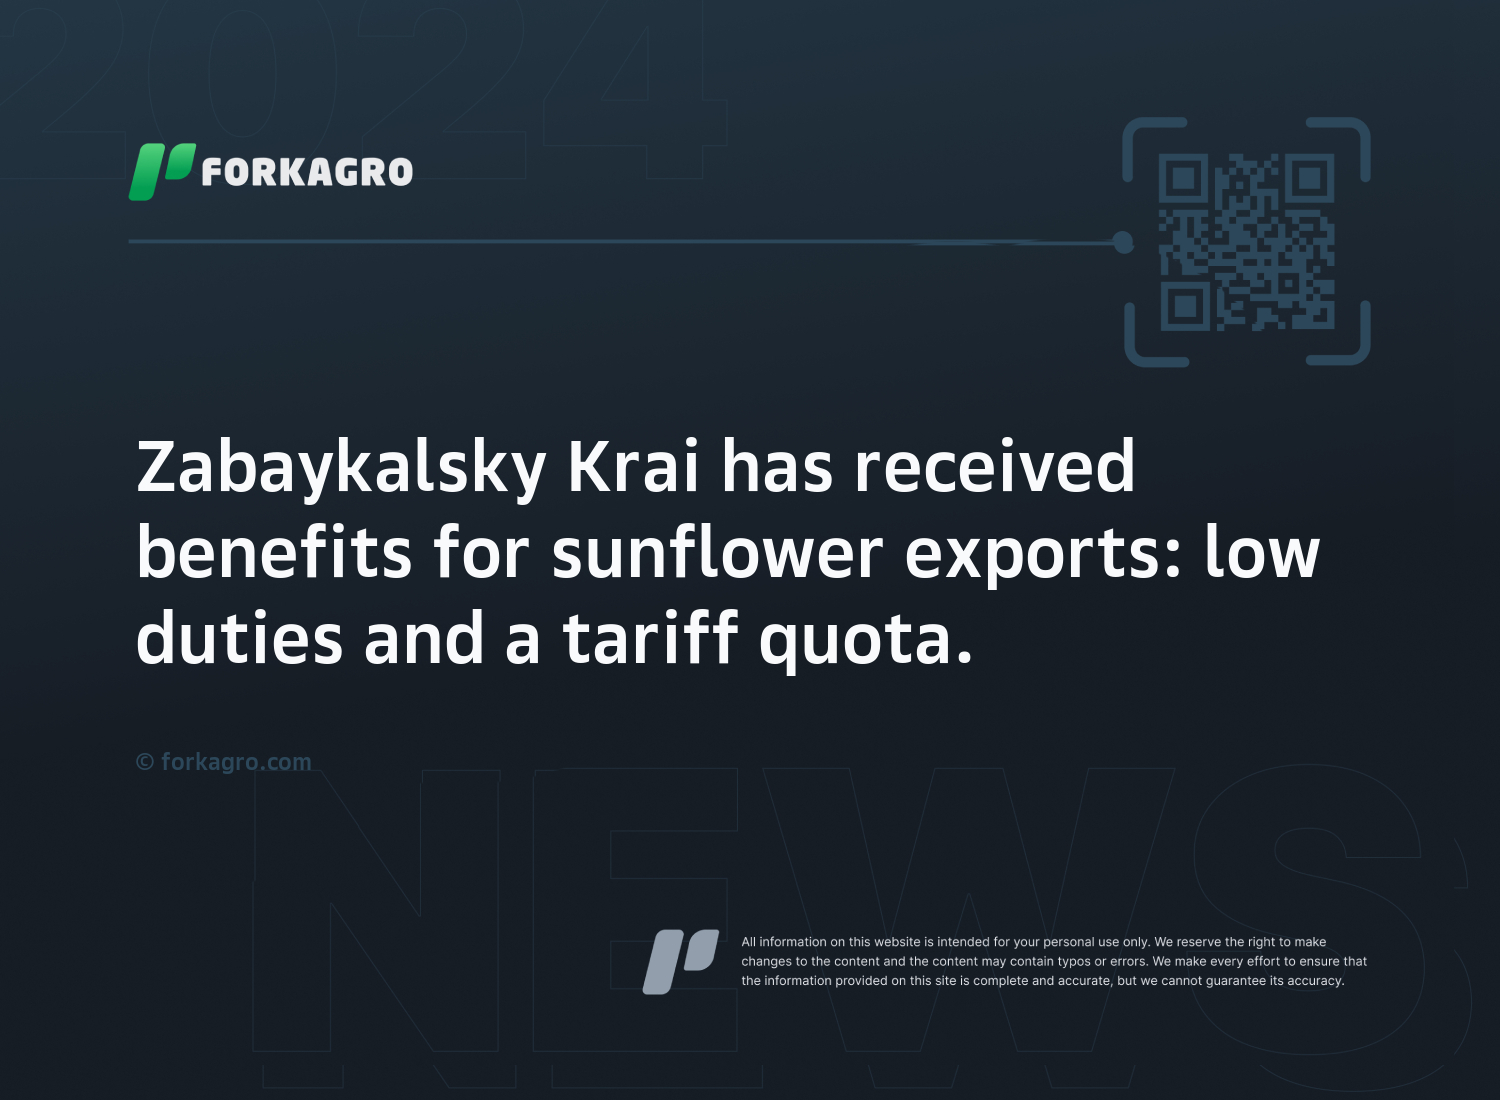 Zabaykalsky Krai has received benefits for sunflower exports: low duties and a tariff quota.